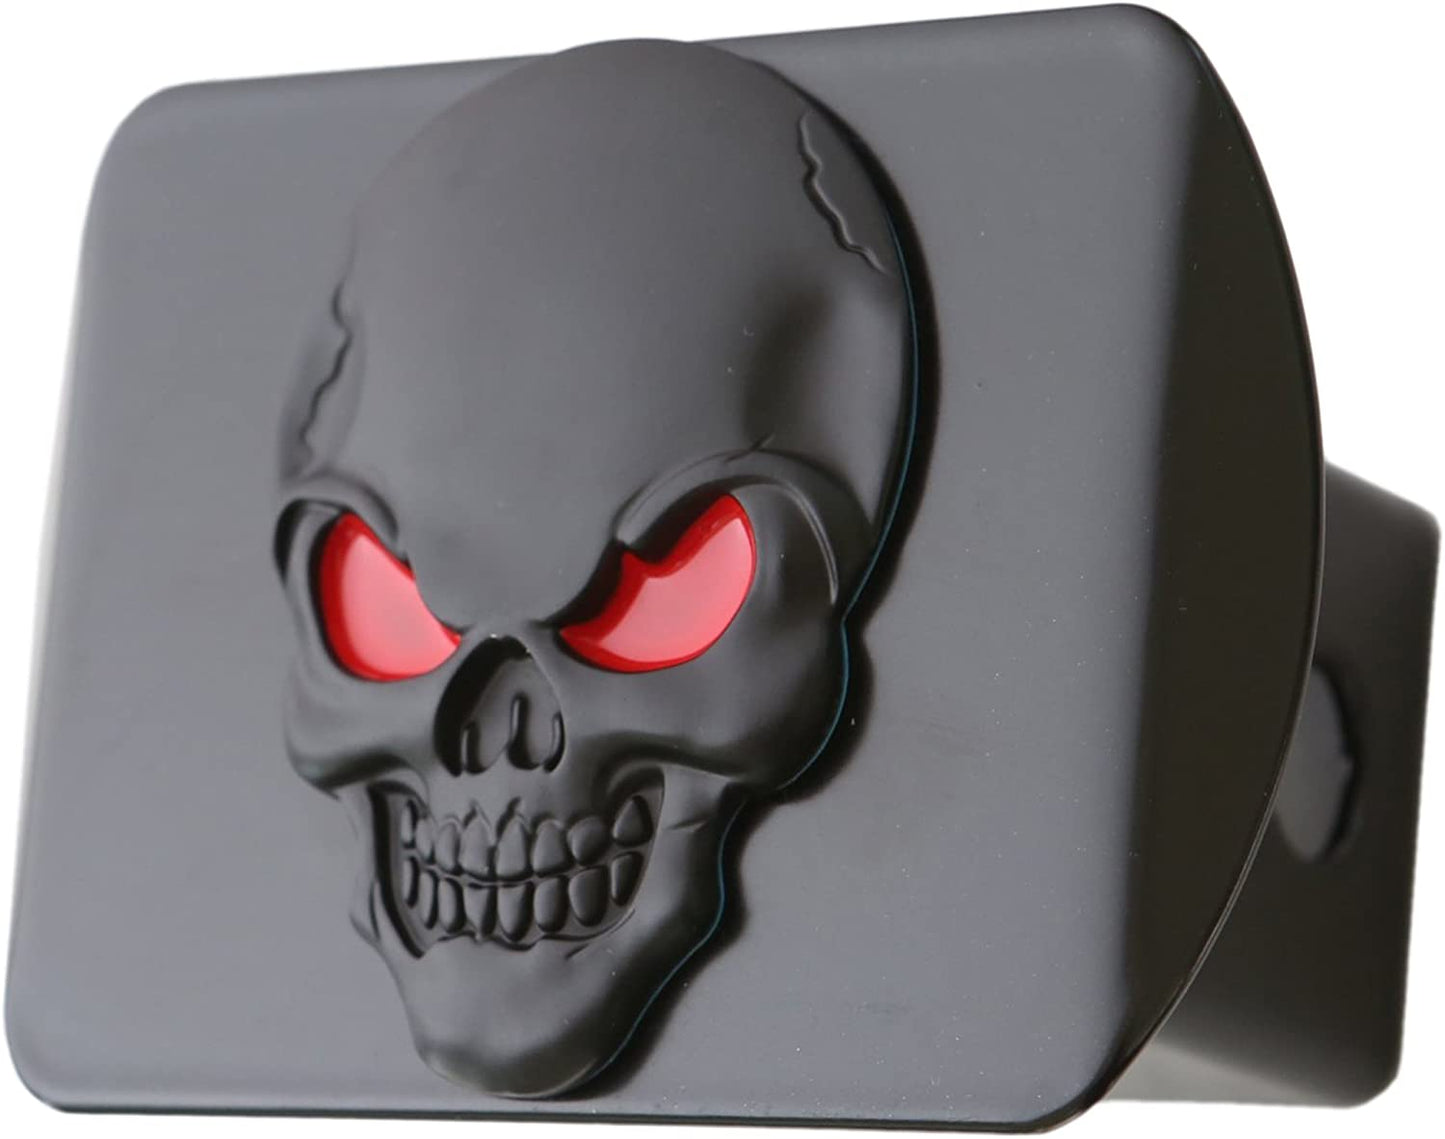 LFPartS Metal Skull Emblem Hitch Cover Red Eyes